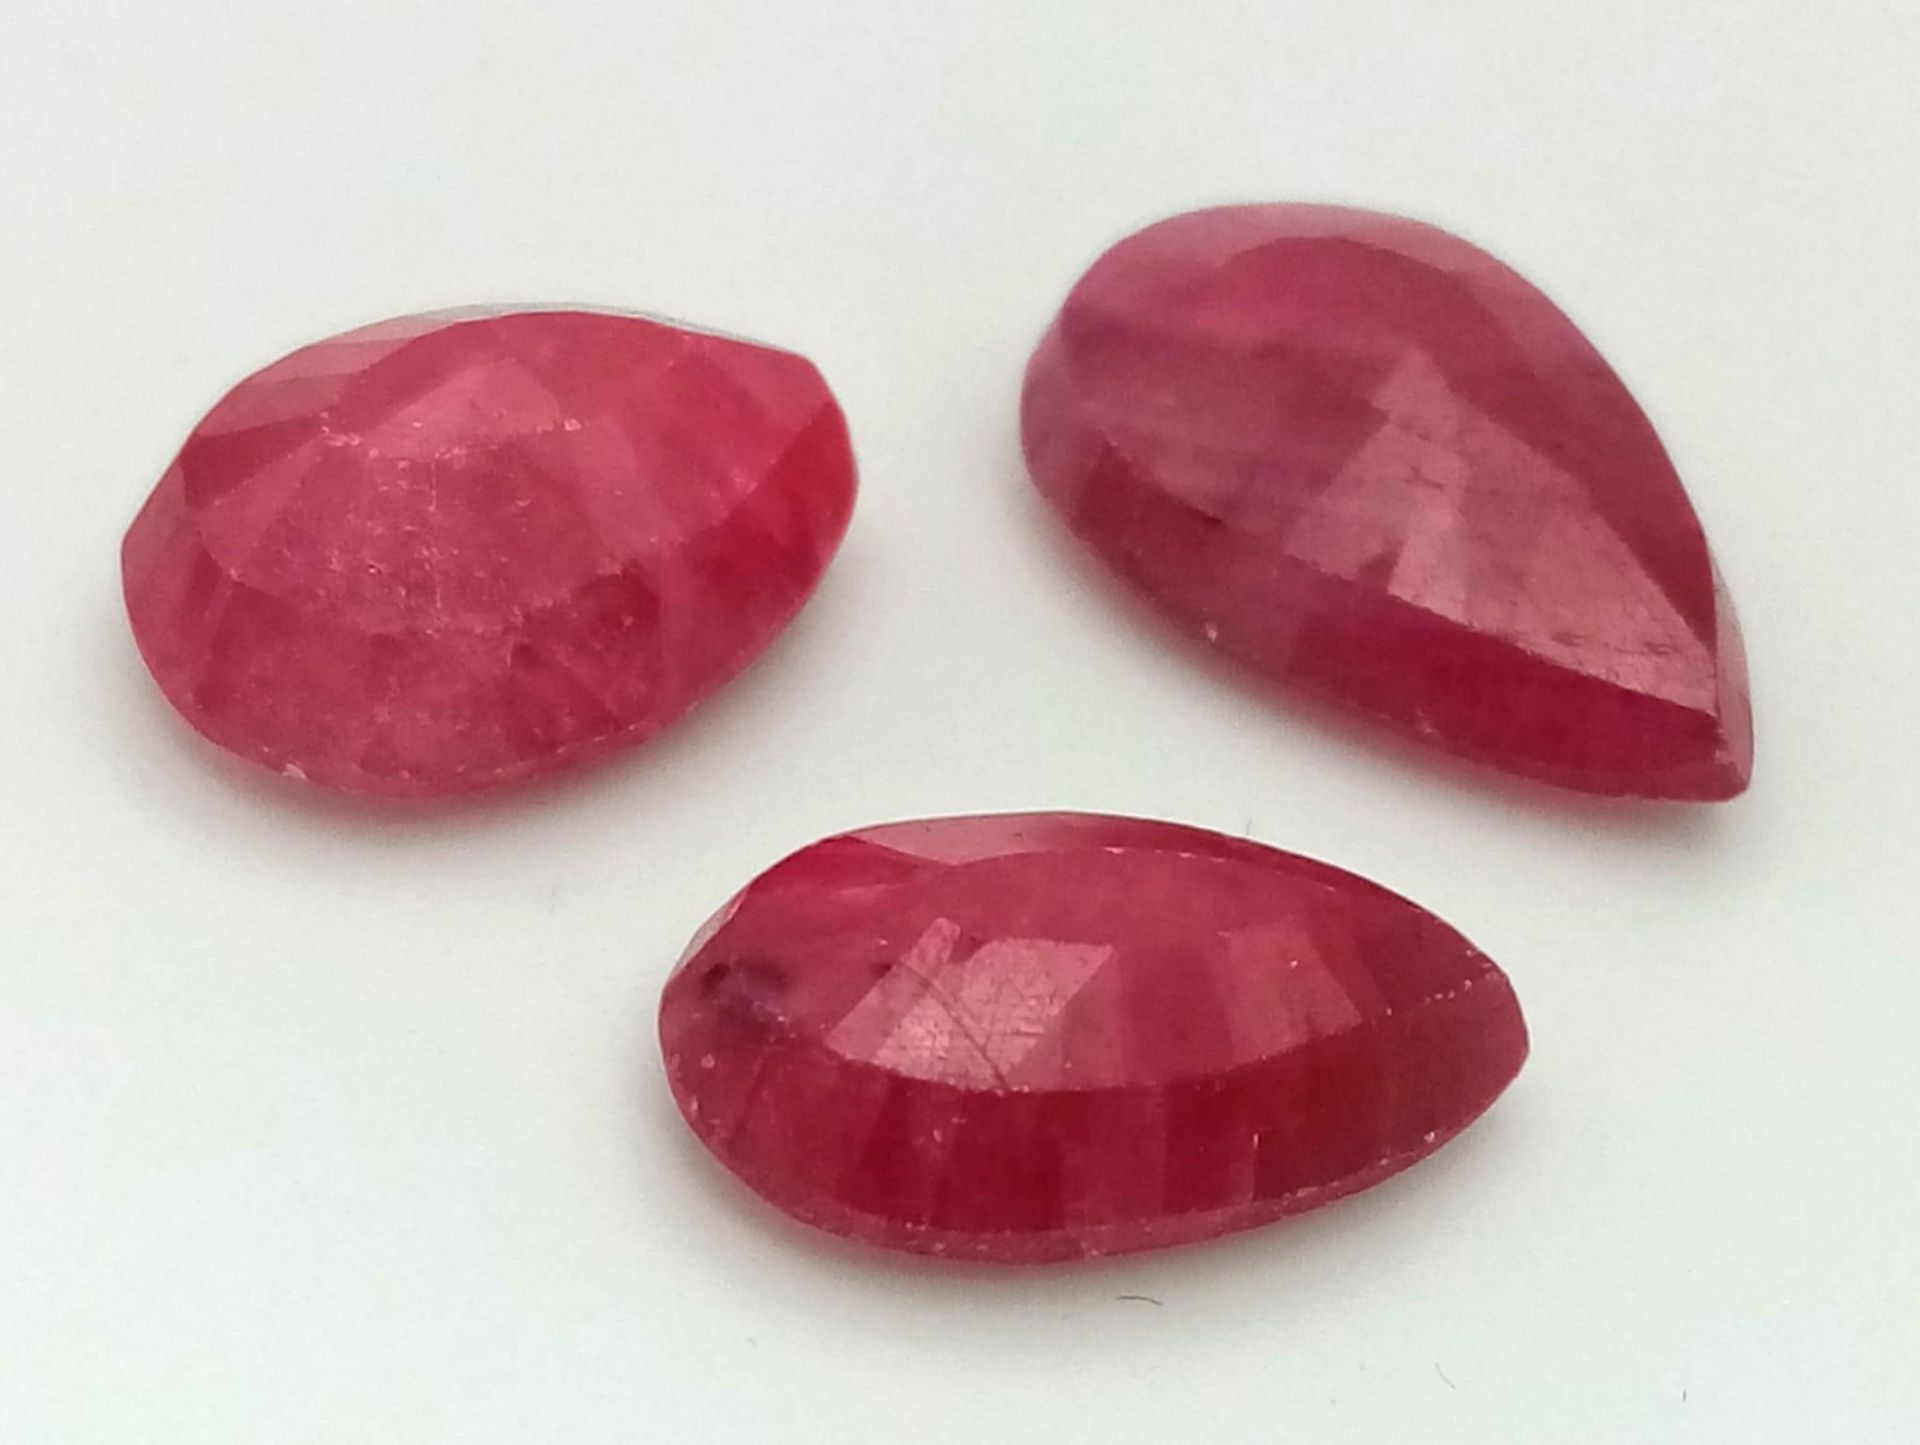 37.23 Ct Faceted Ruby Gemstones Lot of 3 Pcs, Pear Shapes, IGL&I Certified - Image 2 of 4